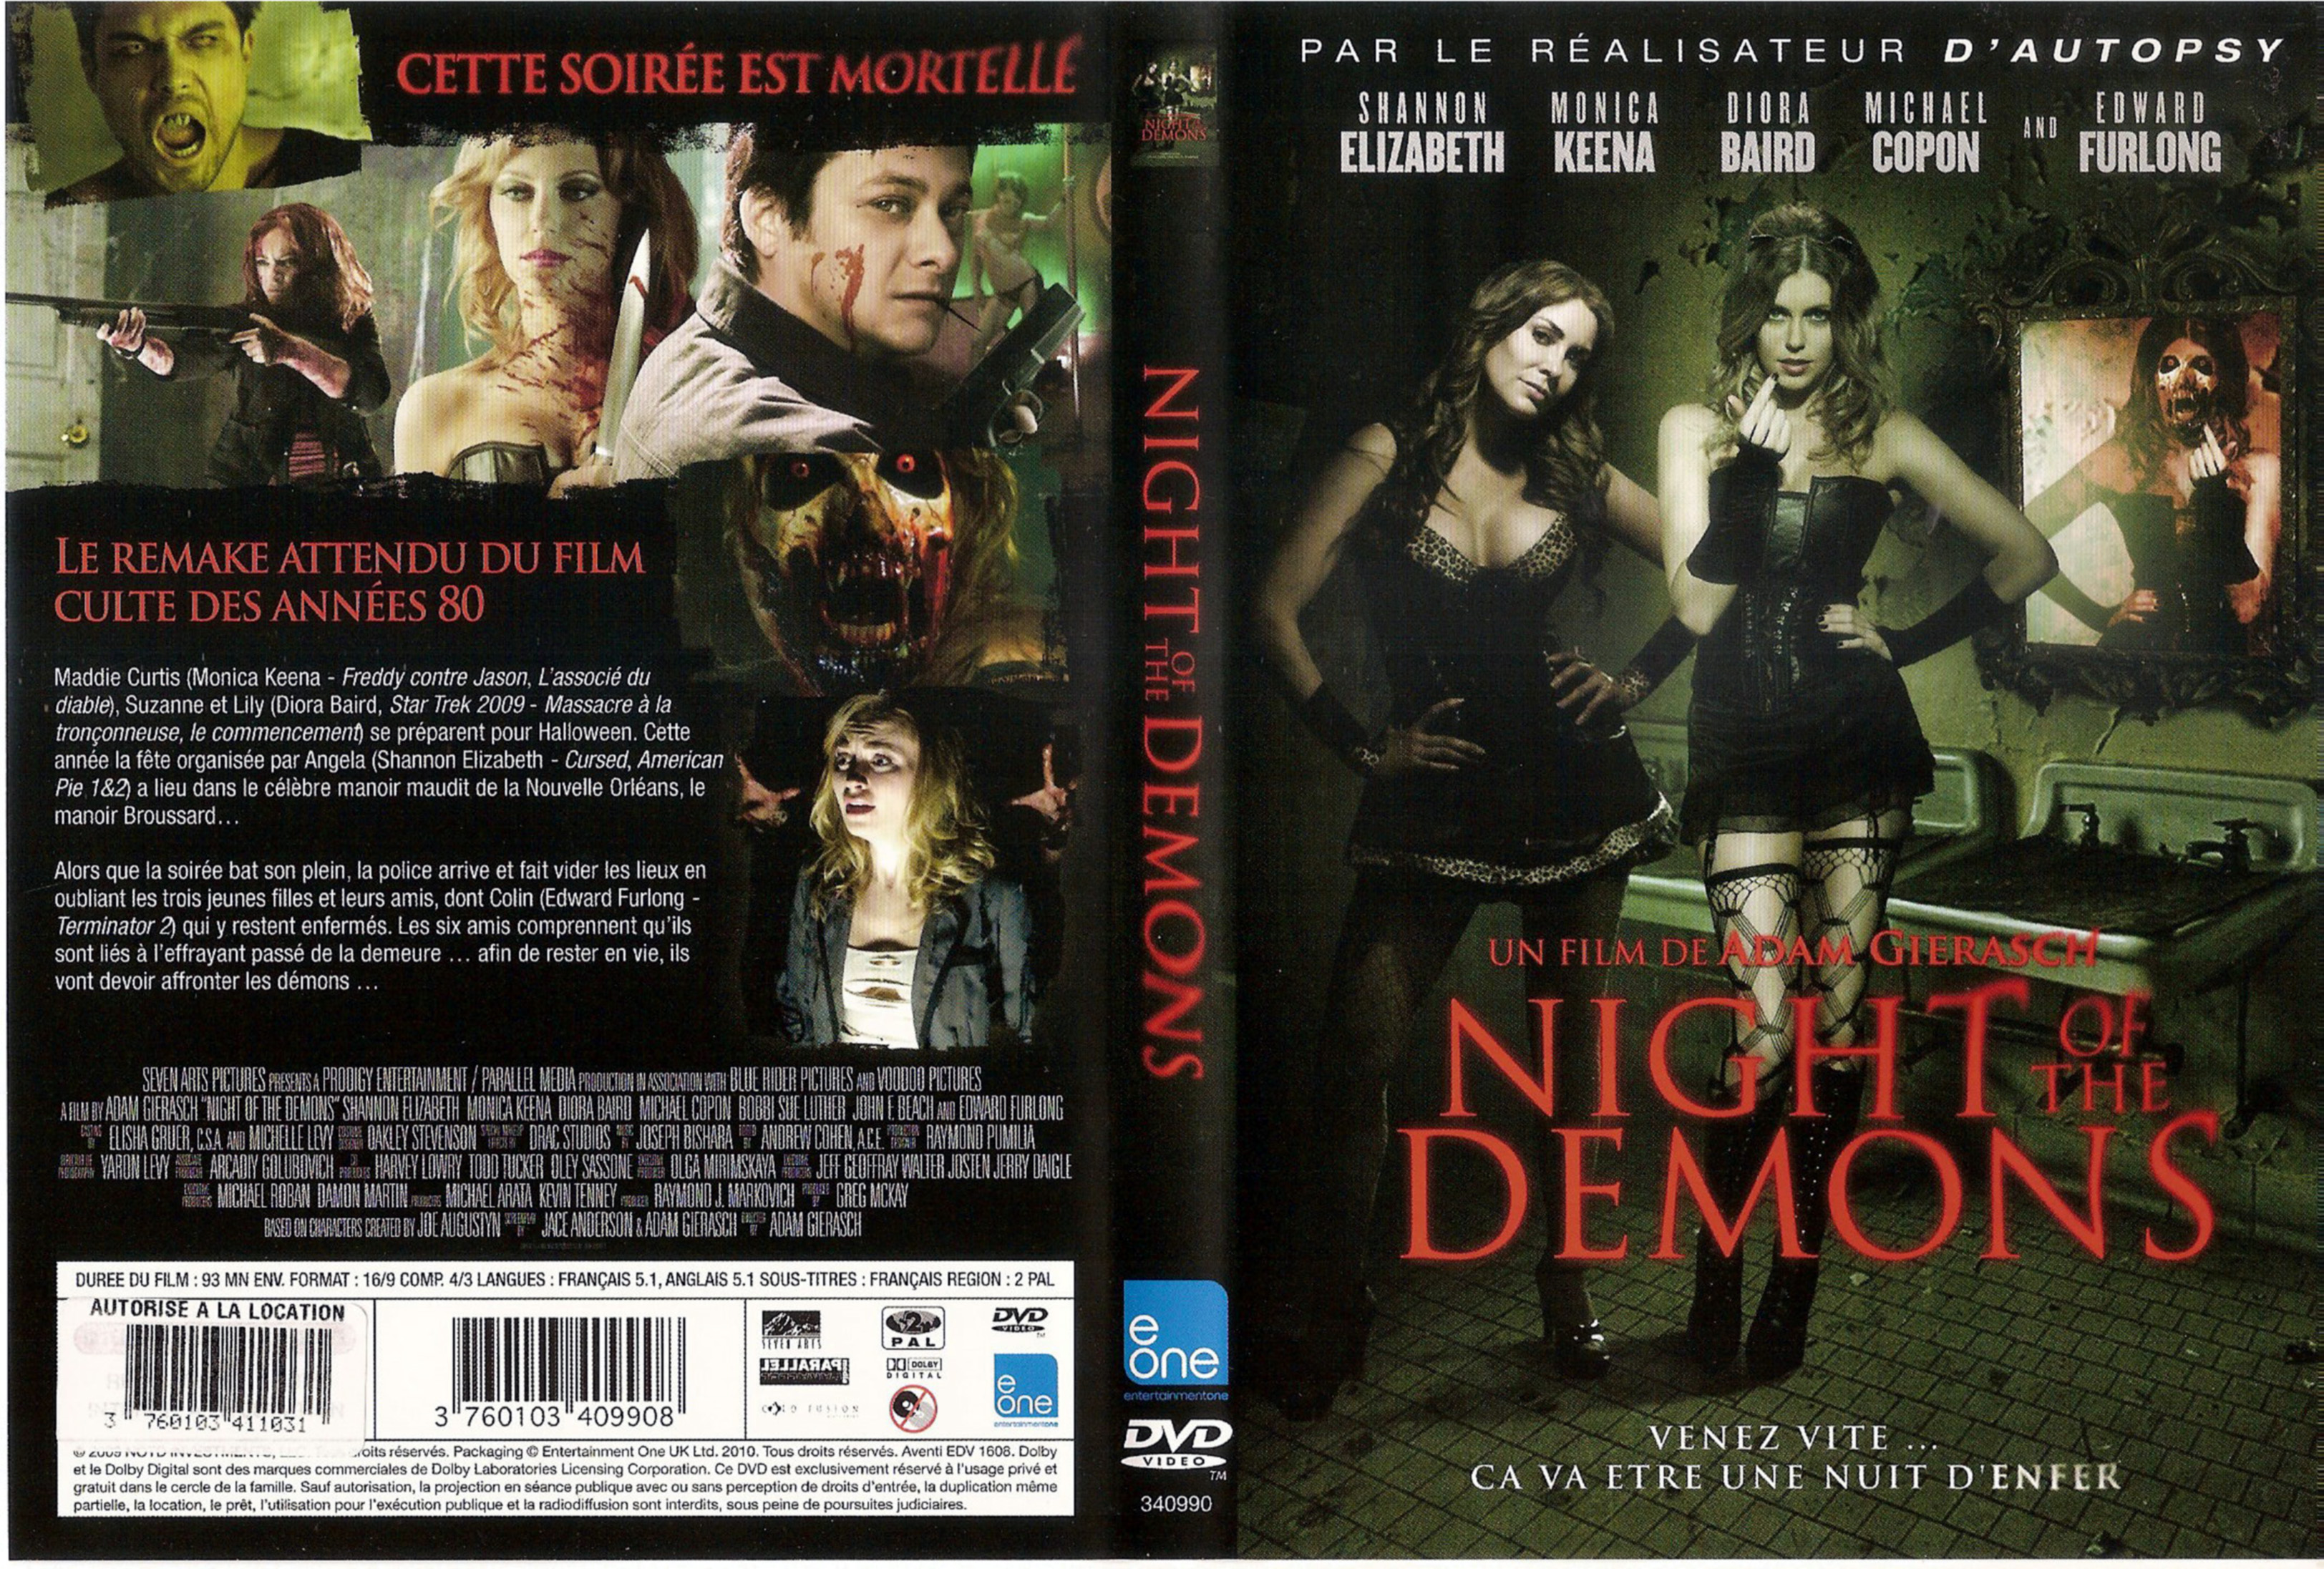 Jaquette DVD Night of the demons (2010)